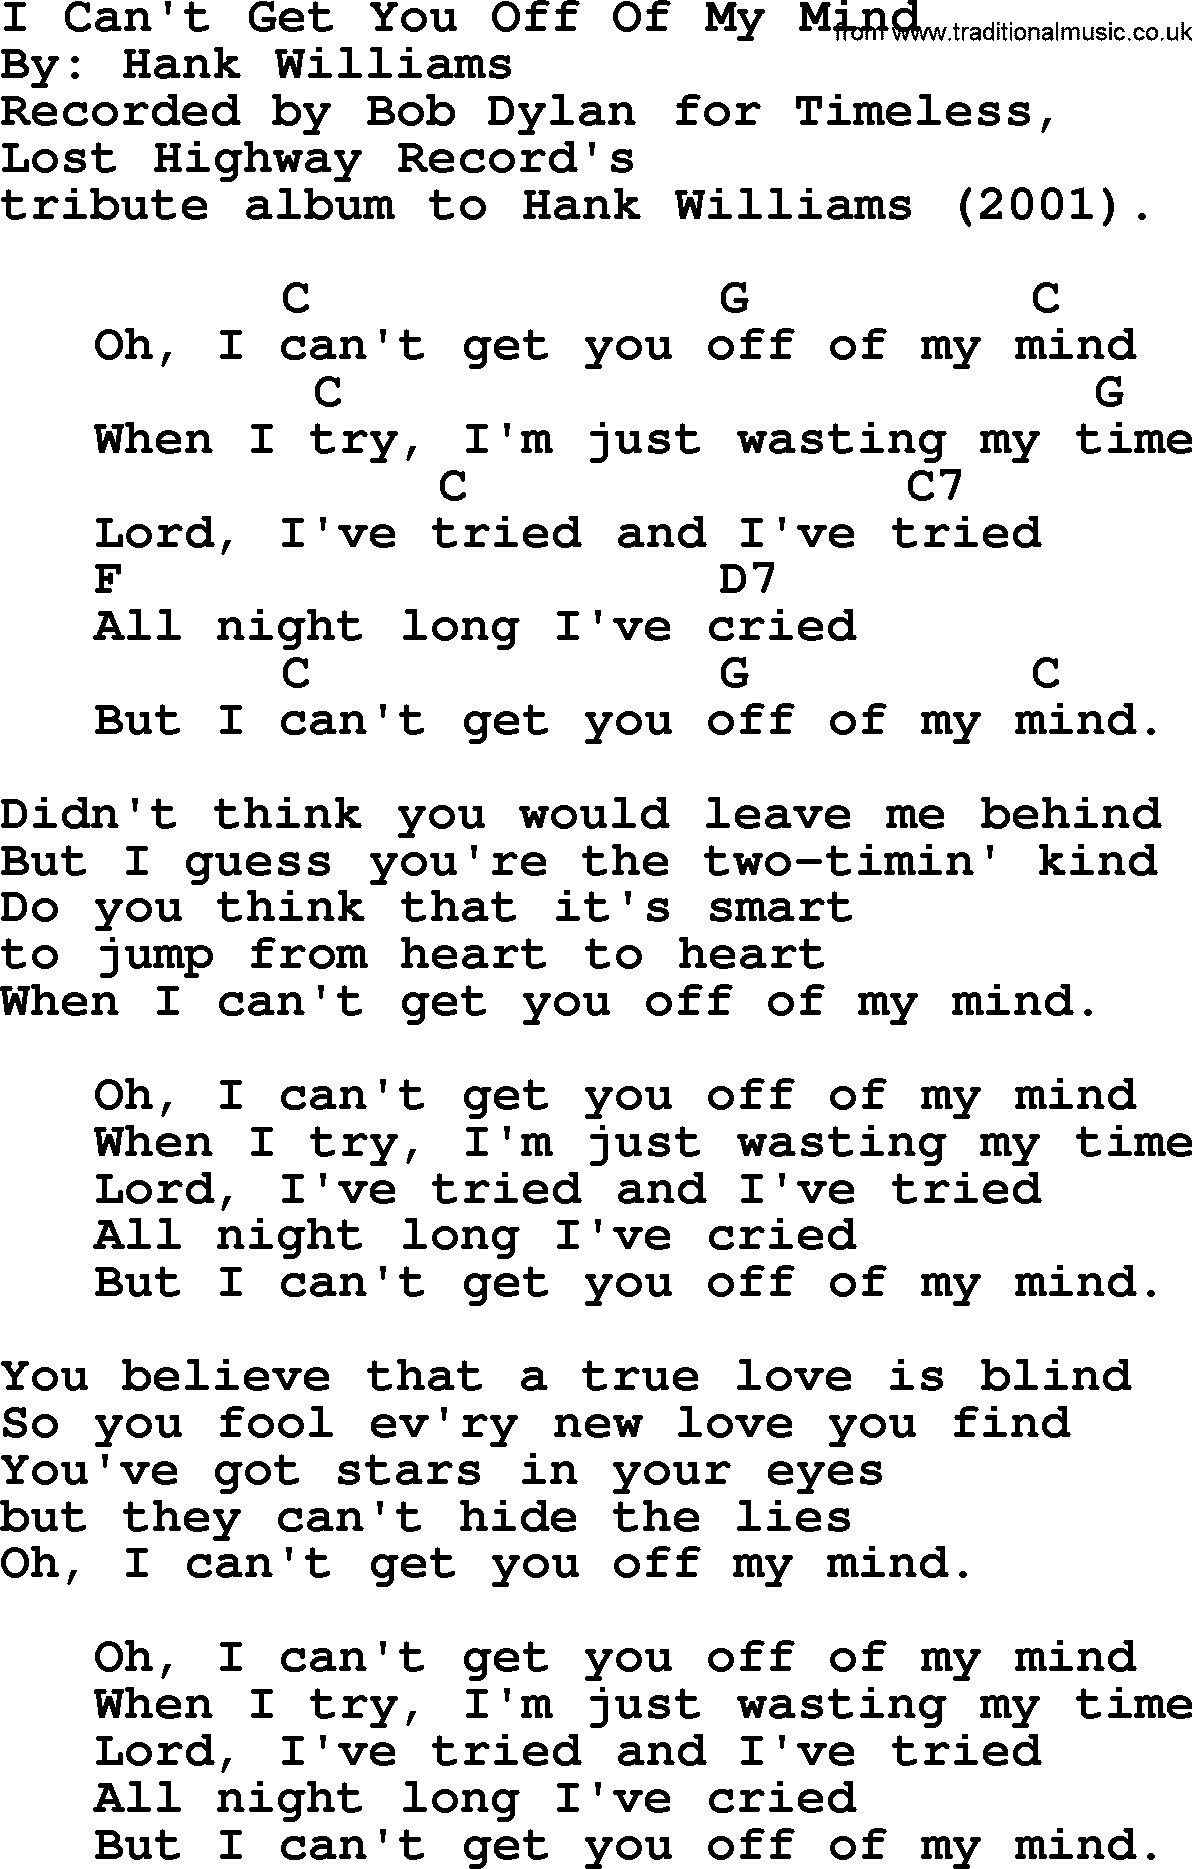 Bob Dylan song, lyrics with chords - I Can't Get You Off Of My Mind